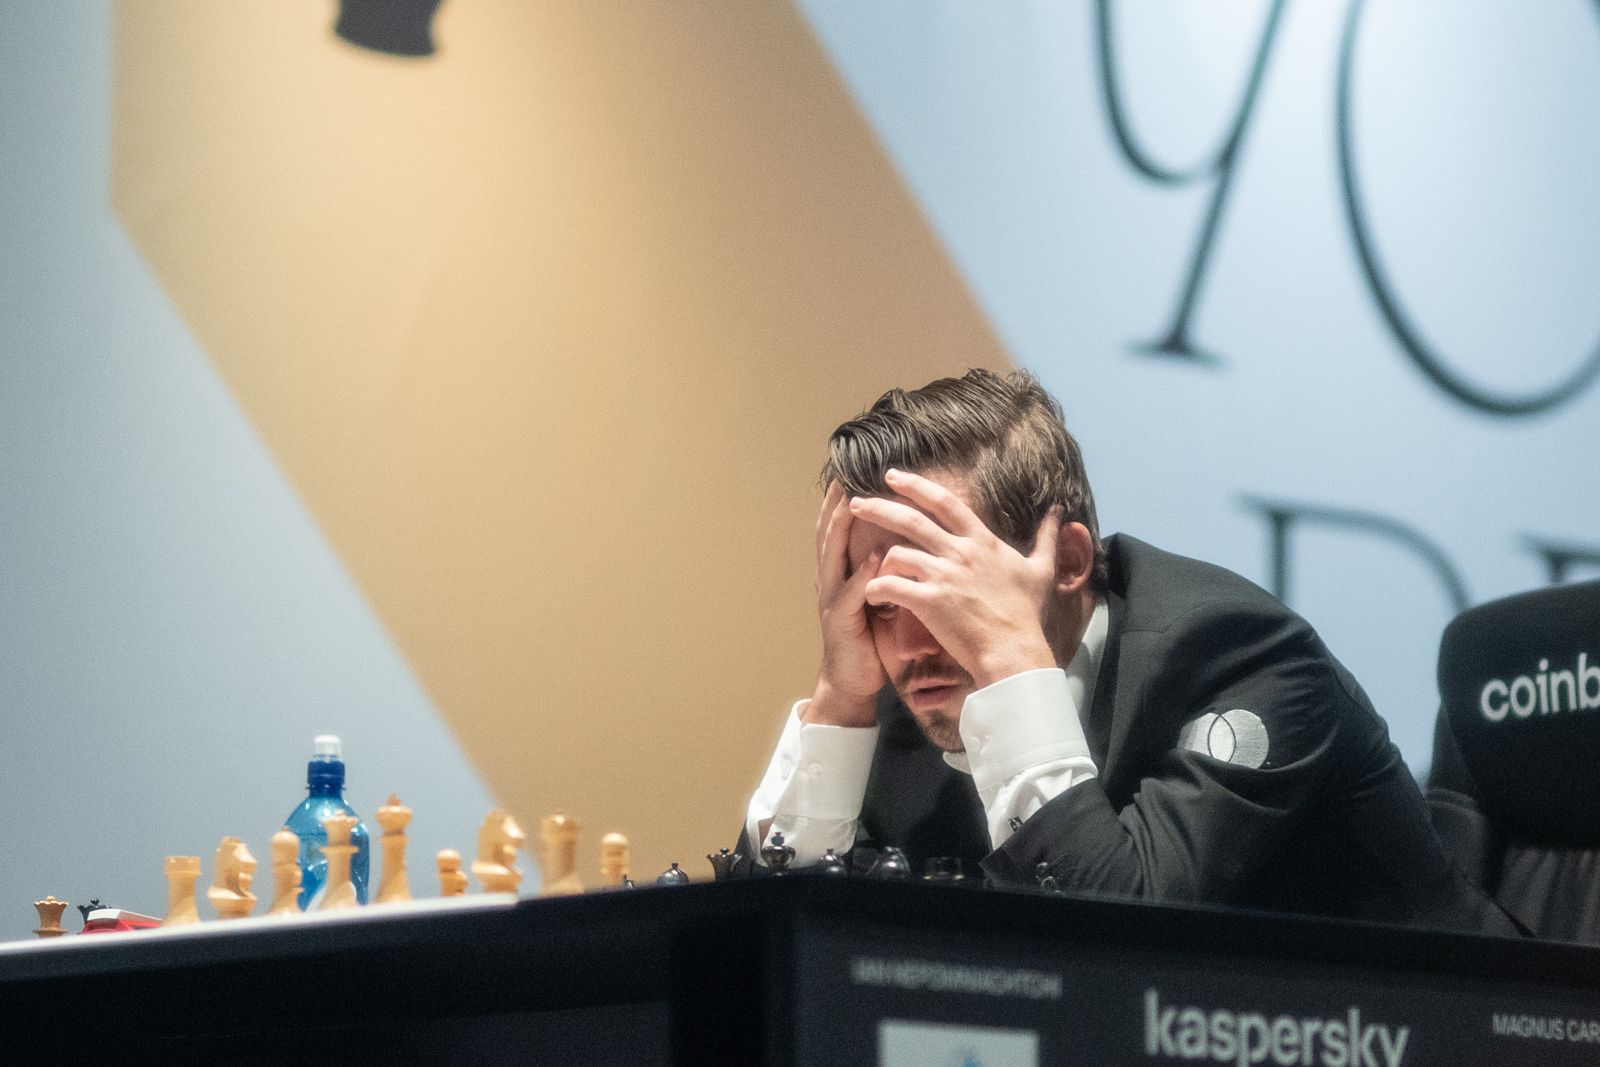 FIDE World Chess Championship Game 3: Magnus Bulletproof With Black - Chess .com